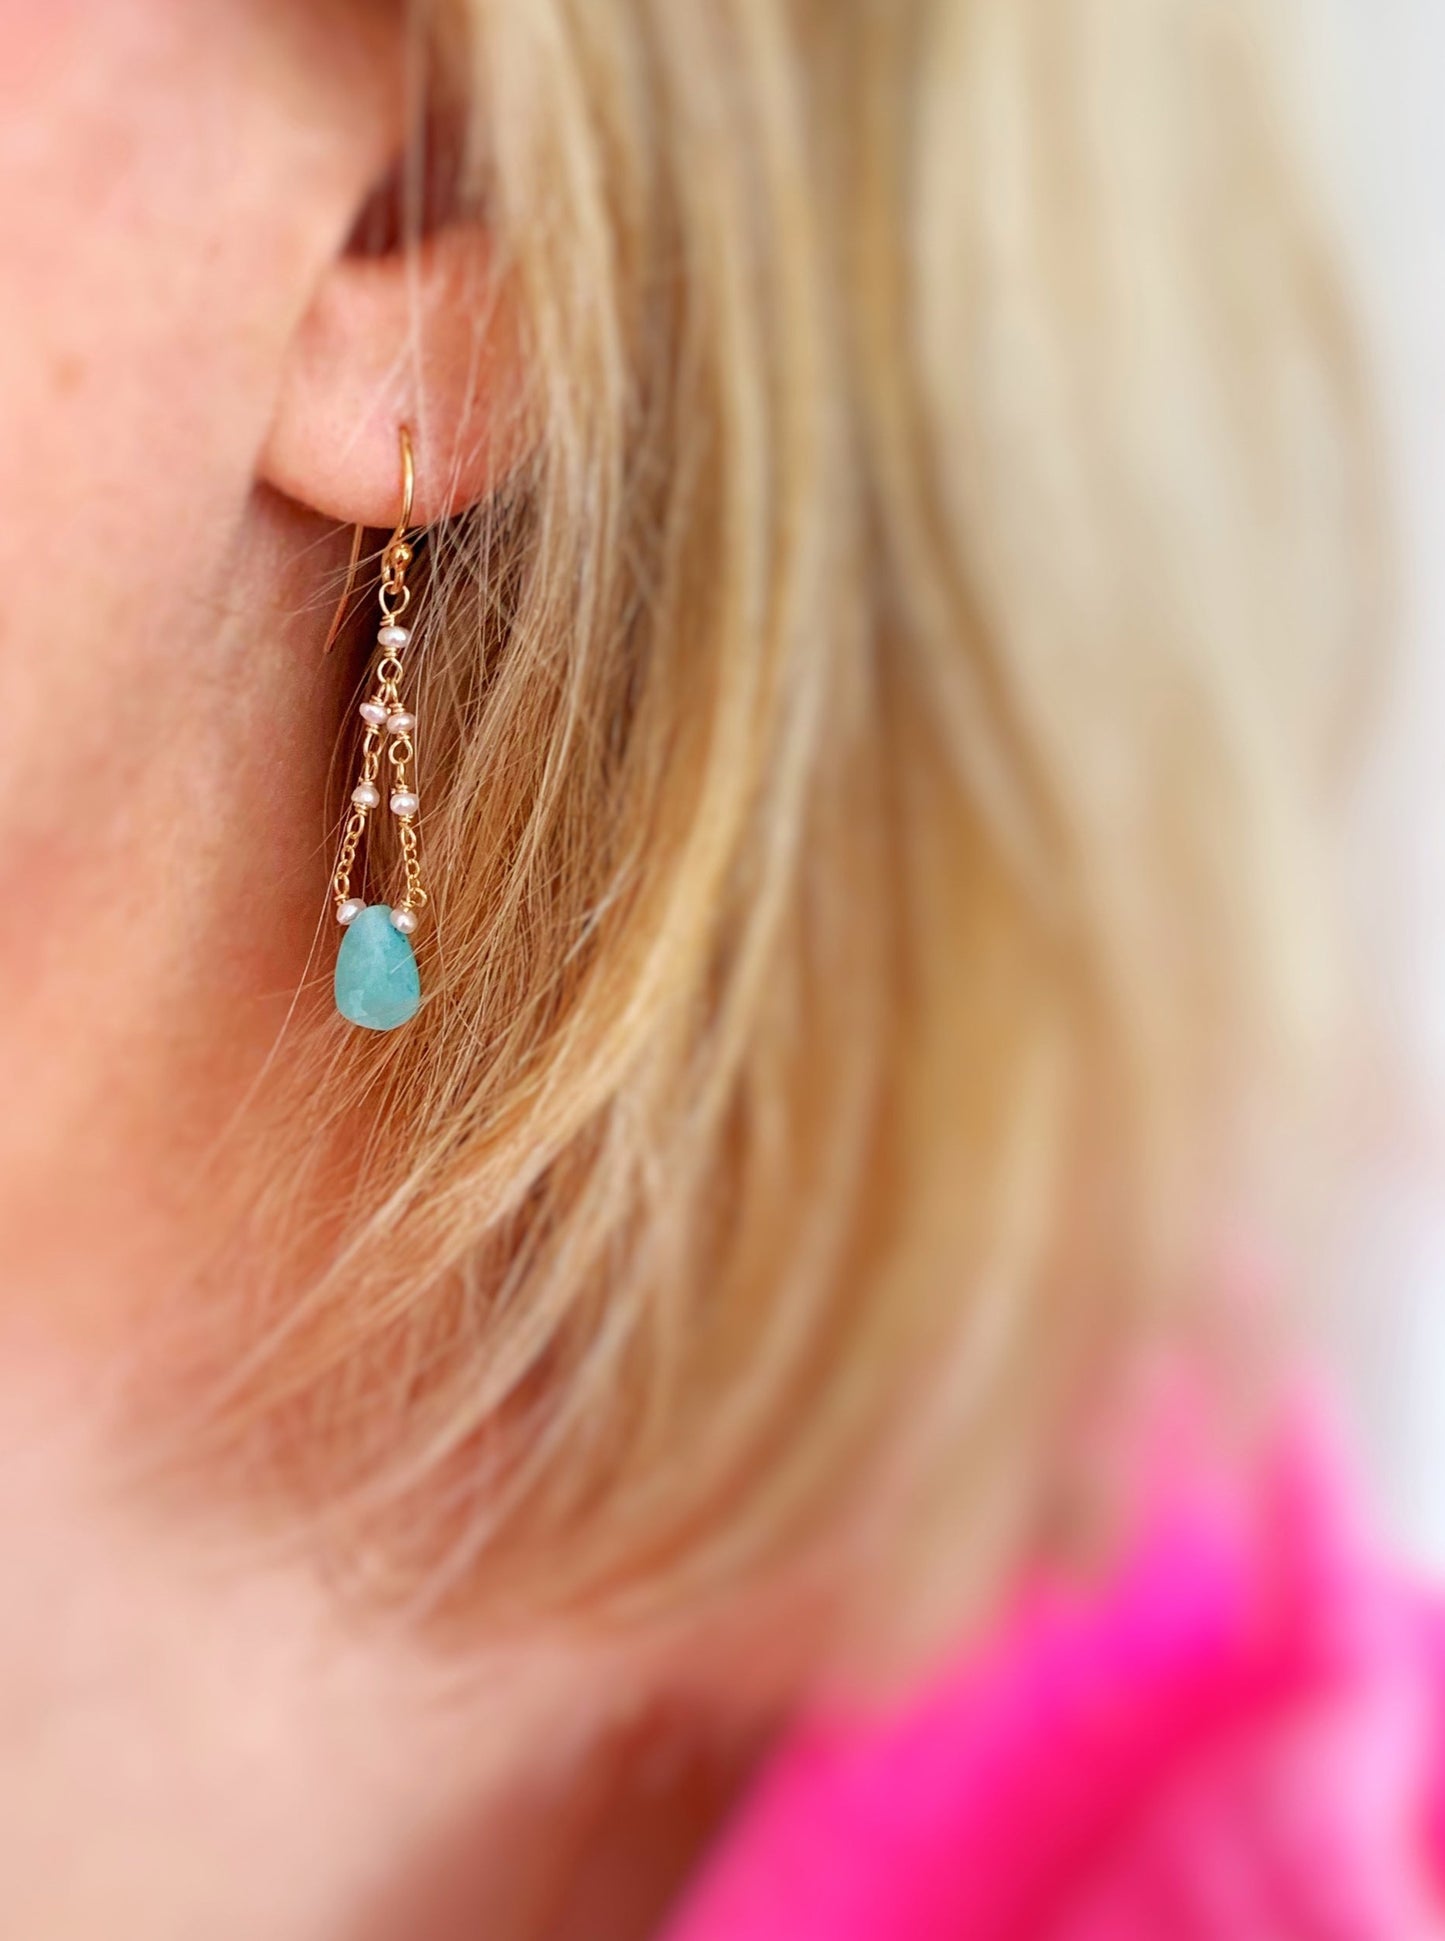 The mermaids and madeleines island air earrings are created with an amazonite teardrop at the center of the drop earrings and chain with freshwater pearls at the top. This is a photo of the earring being worn 